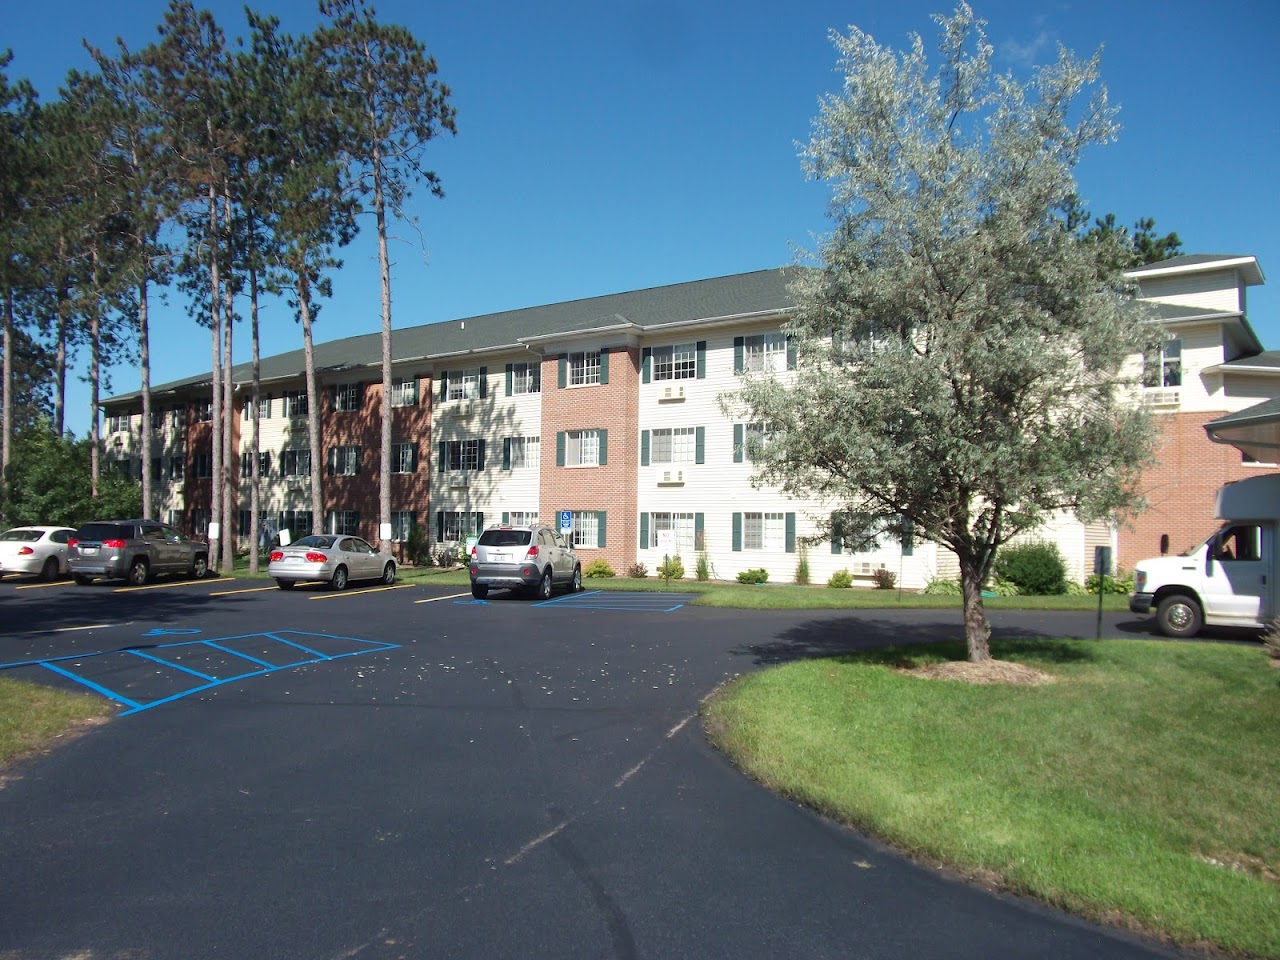 Photo of FOX FIRE SENIOR VILLAGE. Affordable housing located at 2842 OTTER DR WAUPACA, WI 54981